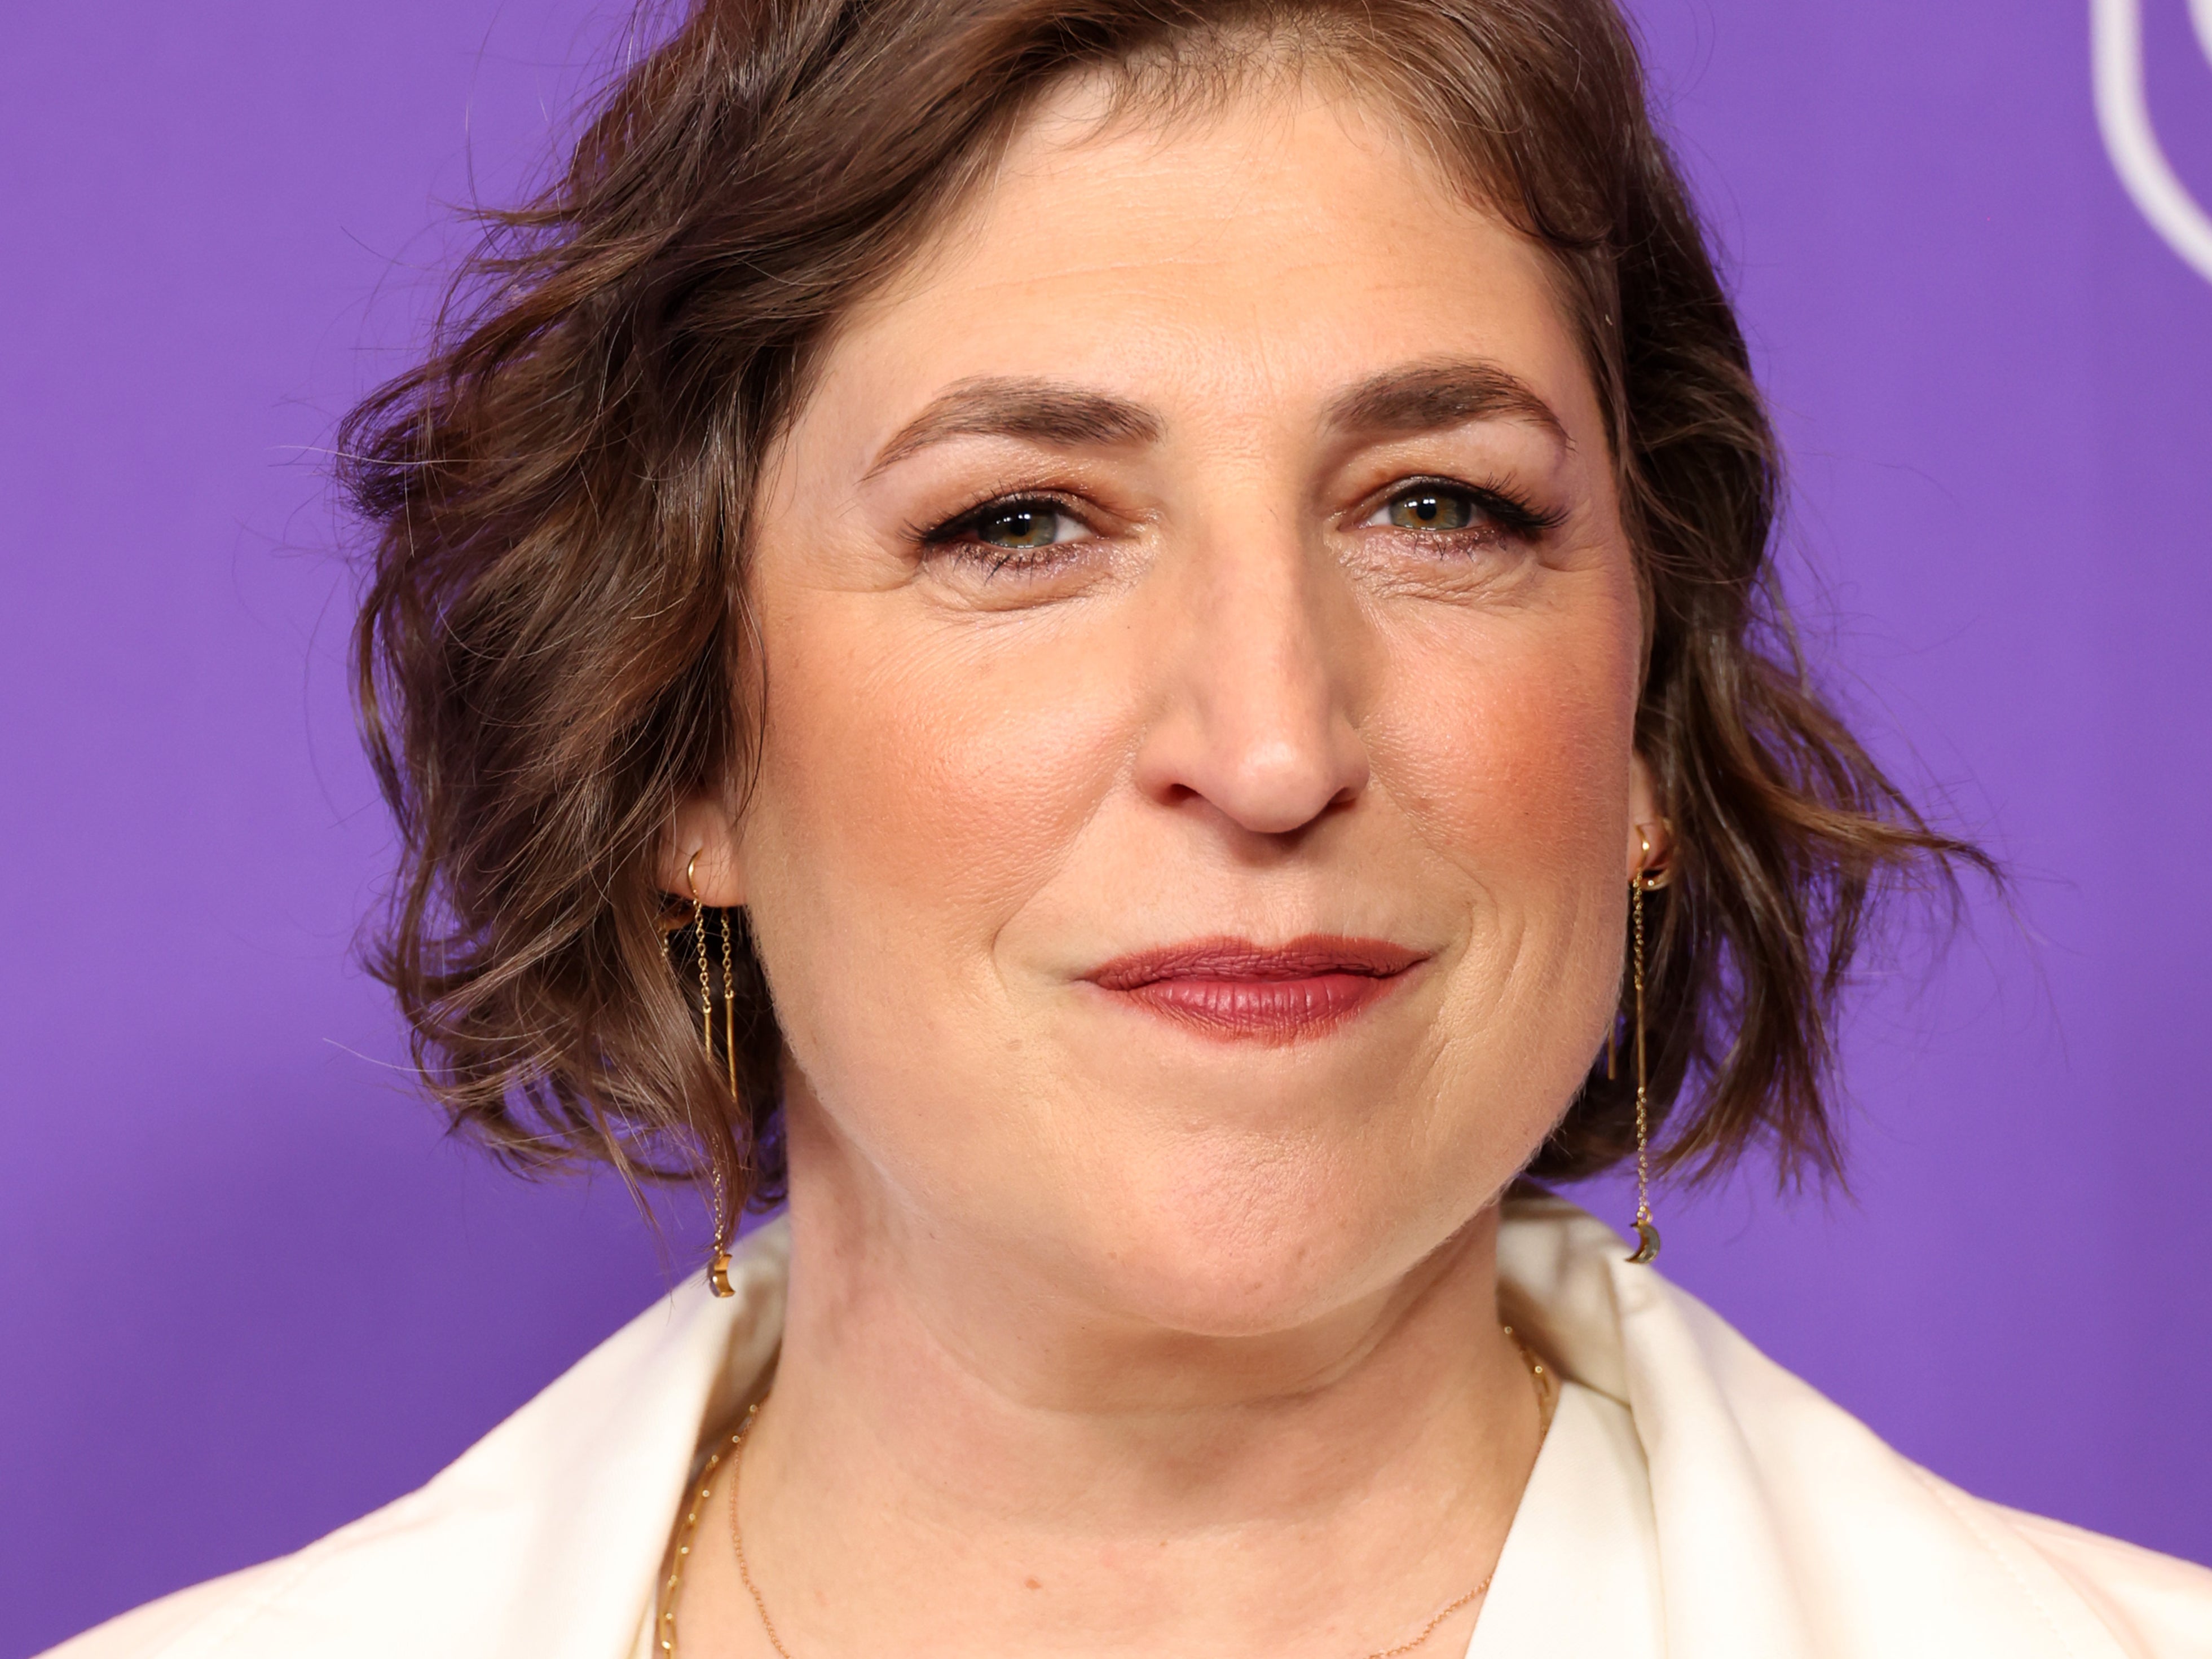 Former ‘Jeopardy!’ host Mayim Bialik added her name to the list